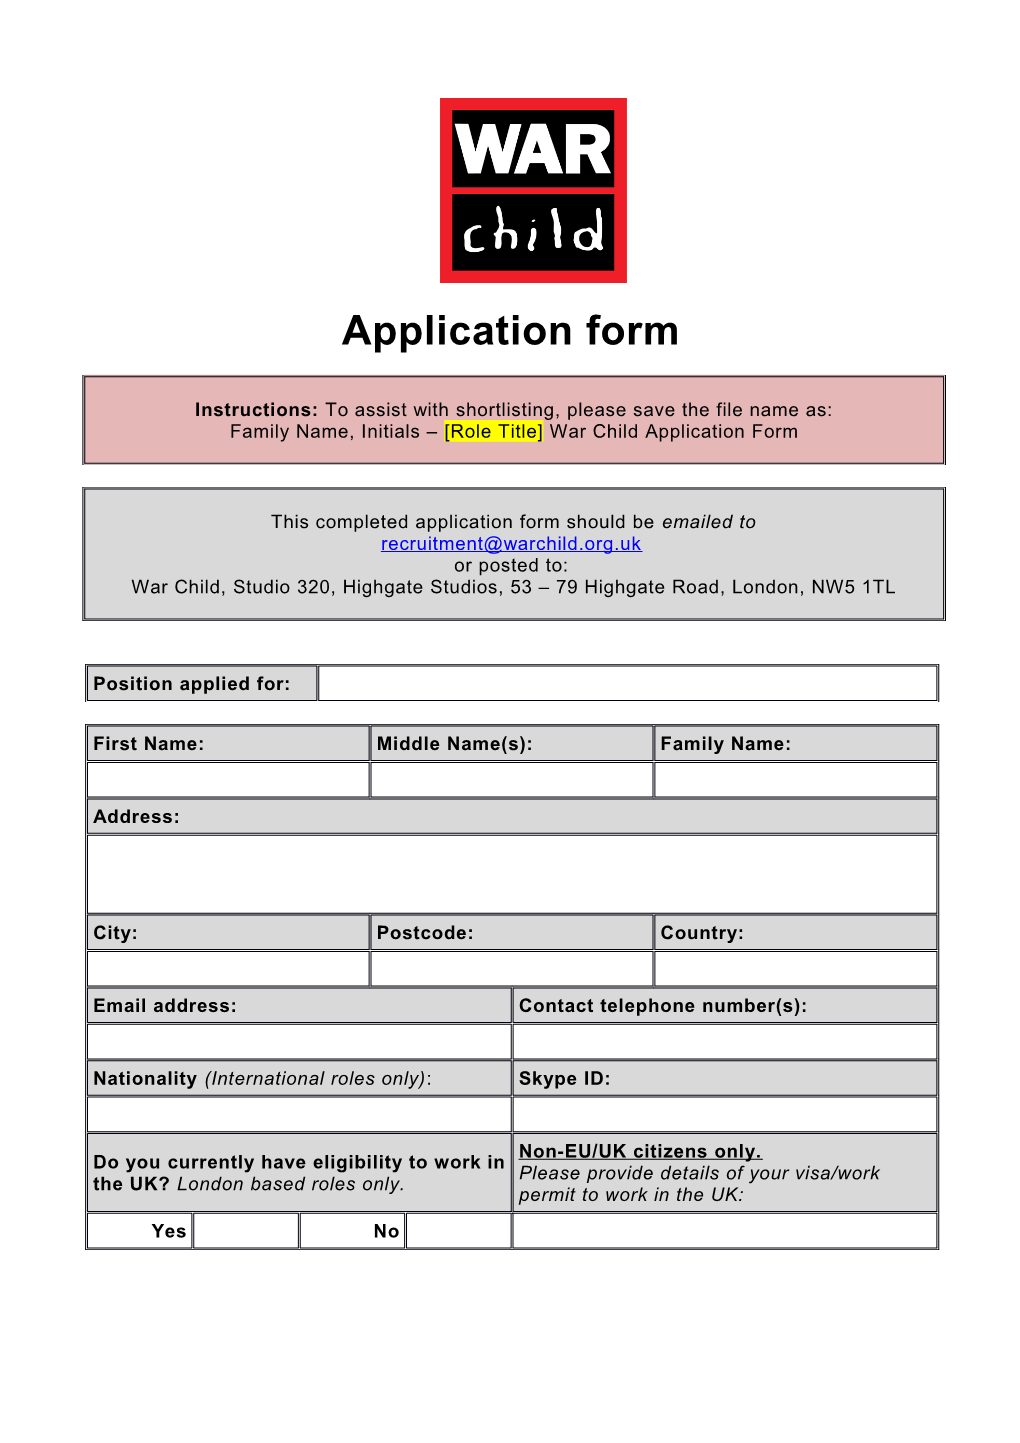 Application Form s53